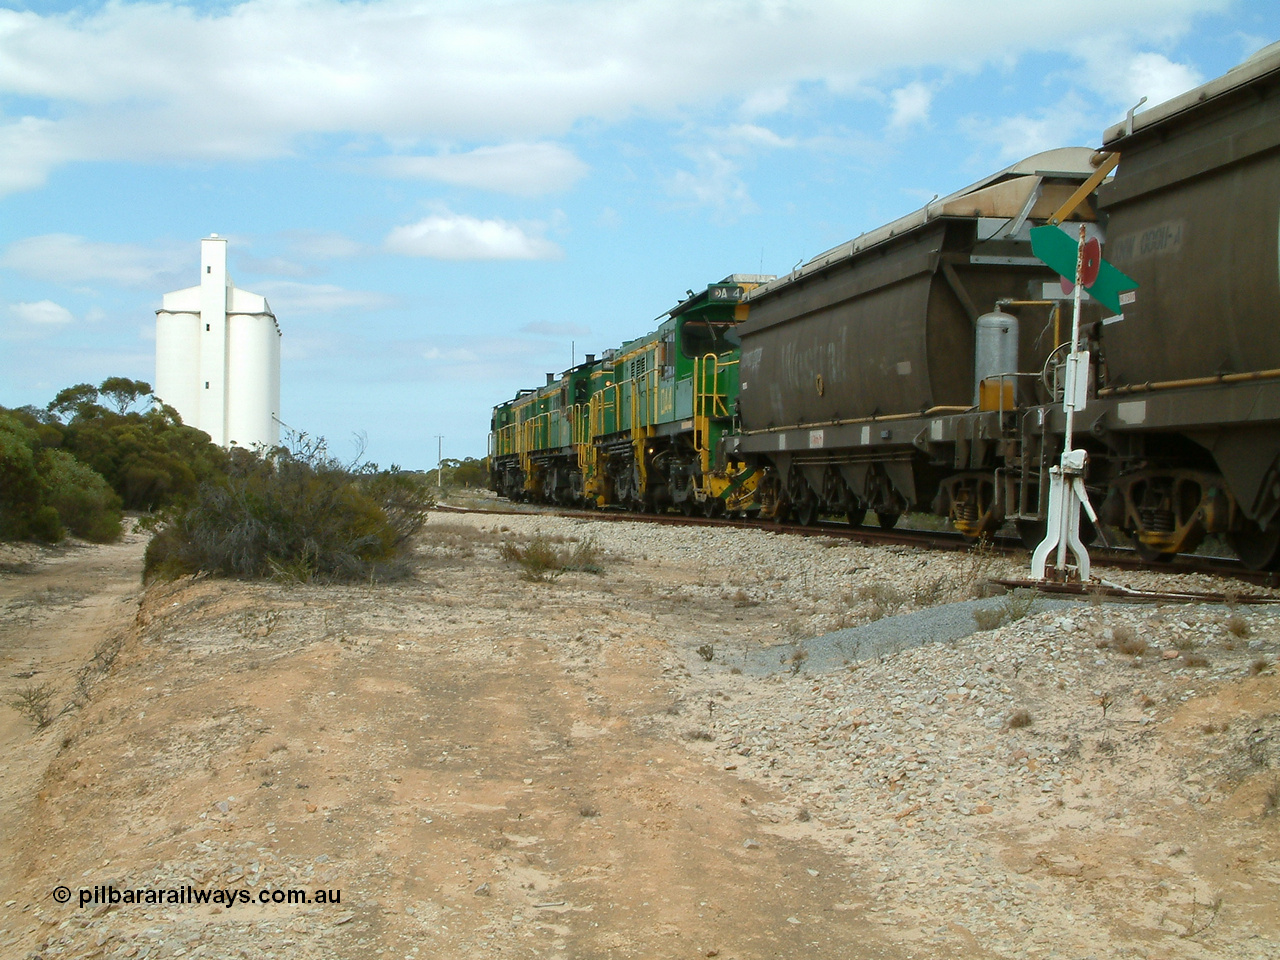 030409 122746
Kielpa, loaded grain train with 830 class unit 851 AE Goodwin ALCo model DL531 serial 84137, 851 has spent its entire operating career on the Eyre Peninsula, leads fellow 830 class 842 serial 84140 and a rebuilt unit DA 4 rumbles over the north end points heading south.
